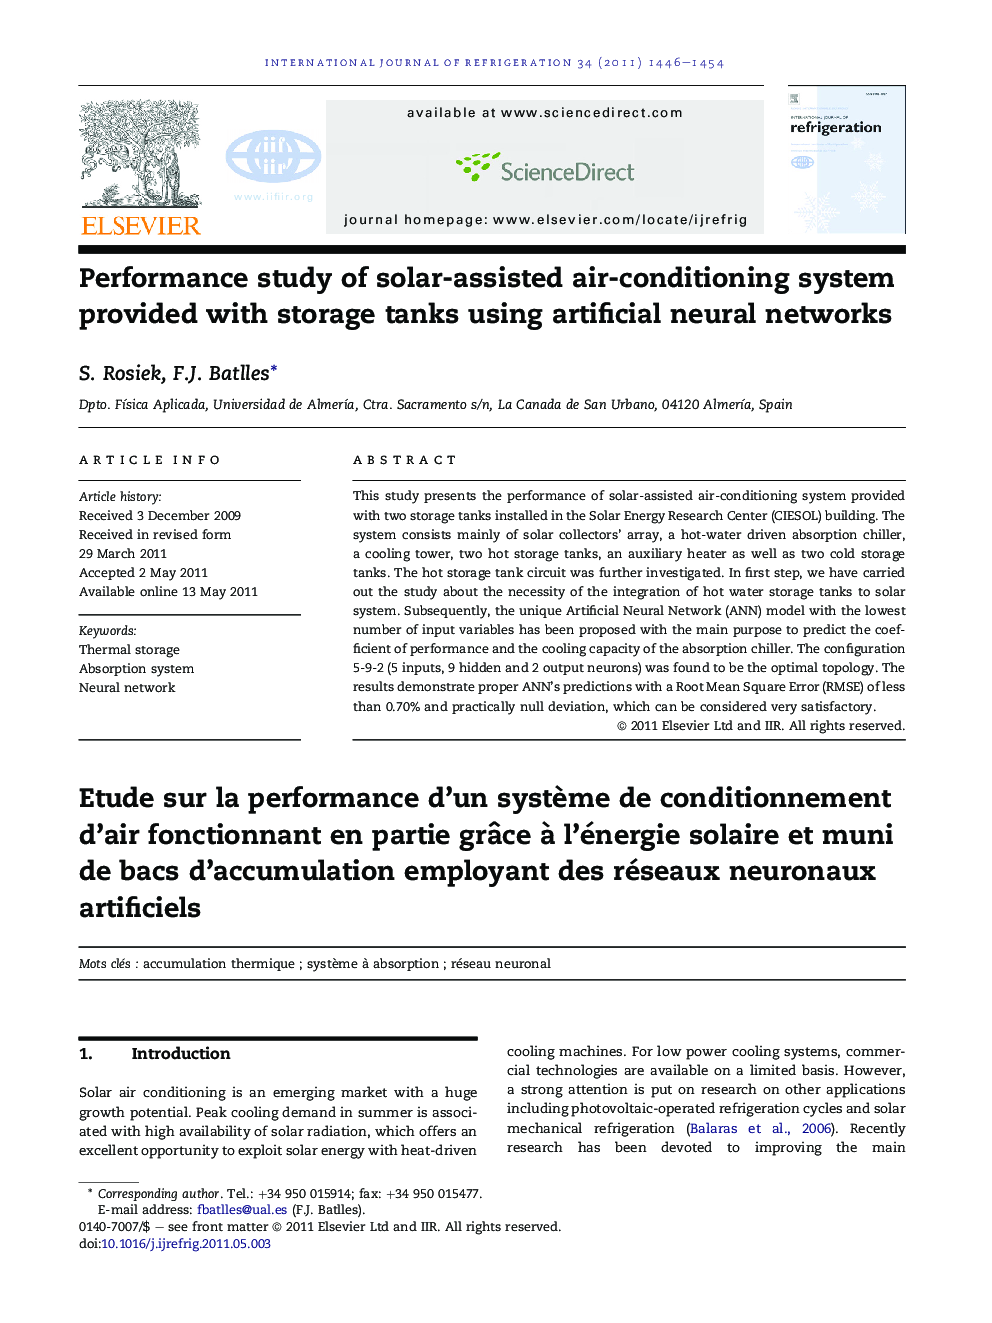 Performance study of solar-assisted air-conditioning system provided with storage tanks using artificial neural networks